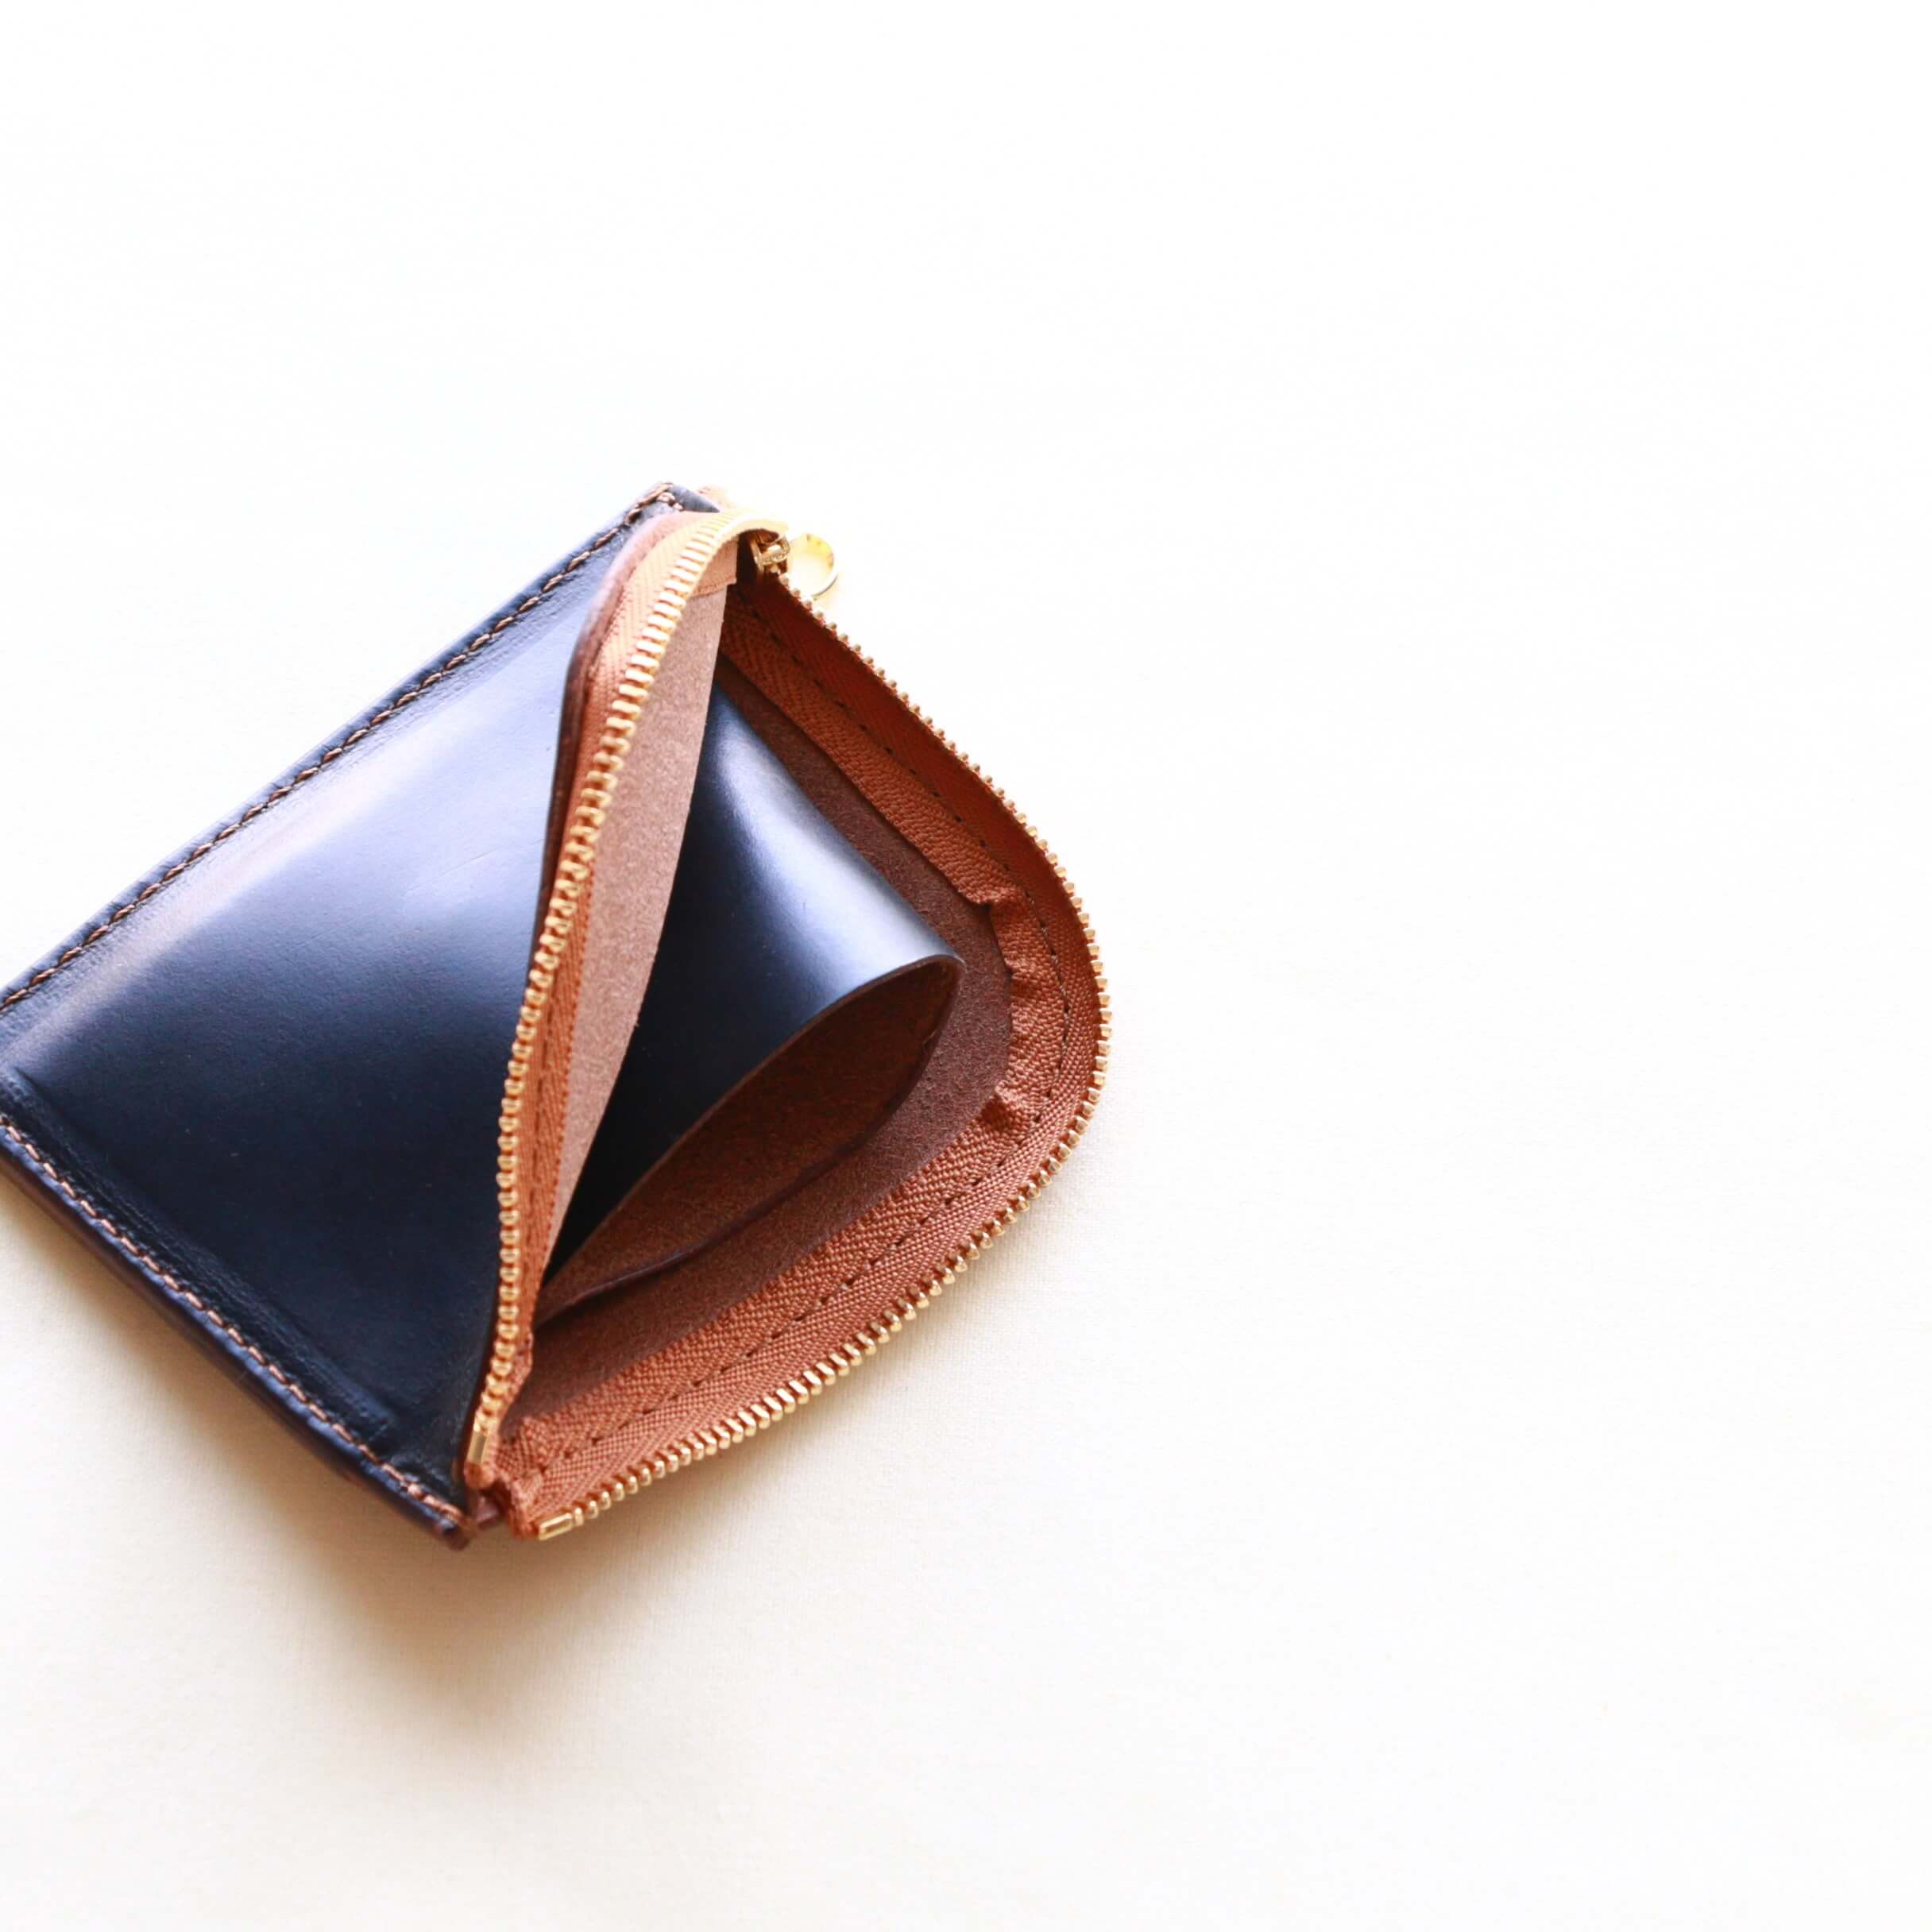 Vintage Works ヴィンテージワークス Leather Wallet クロムエクセルＬ字型レザーウォレット